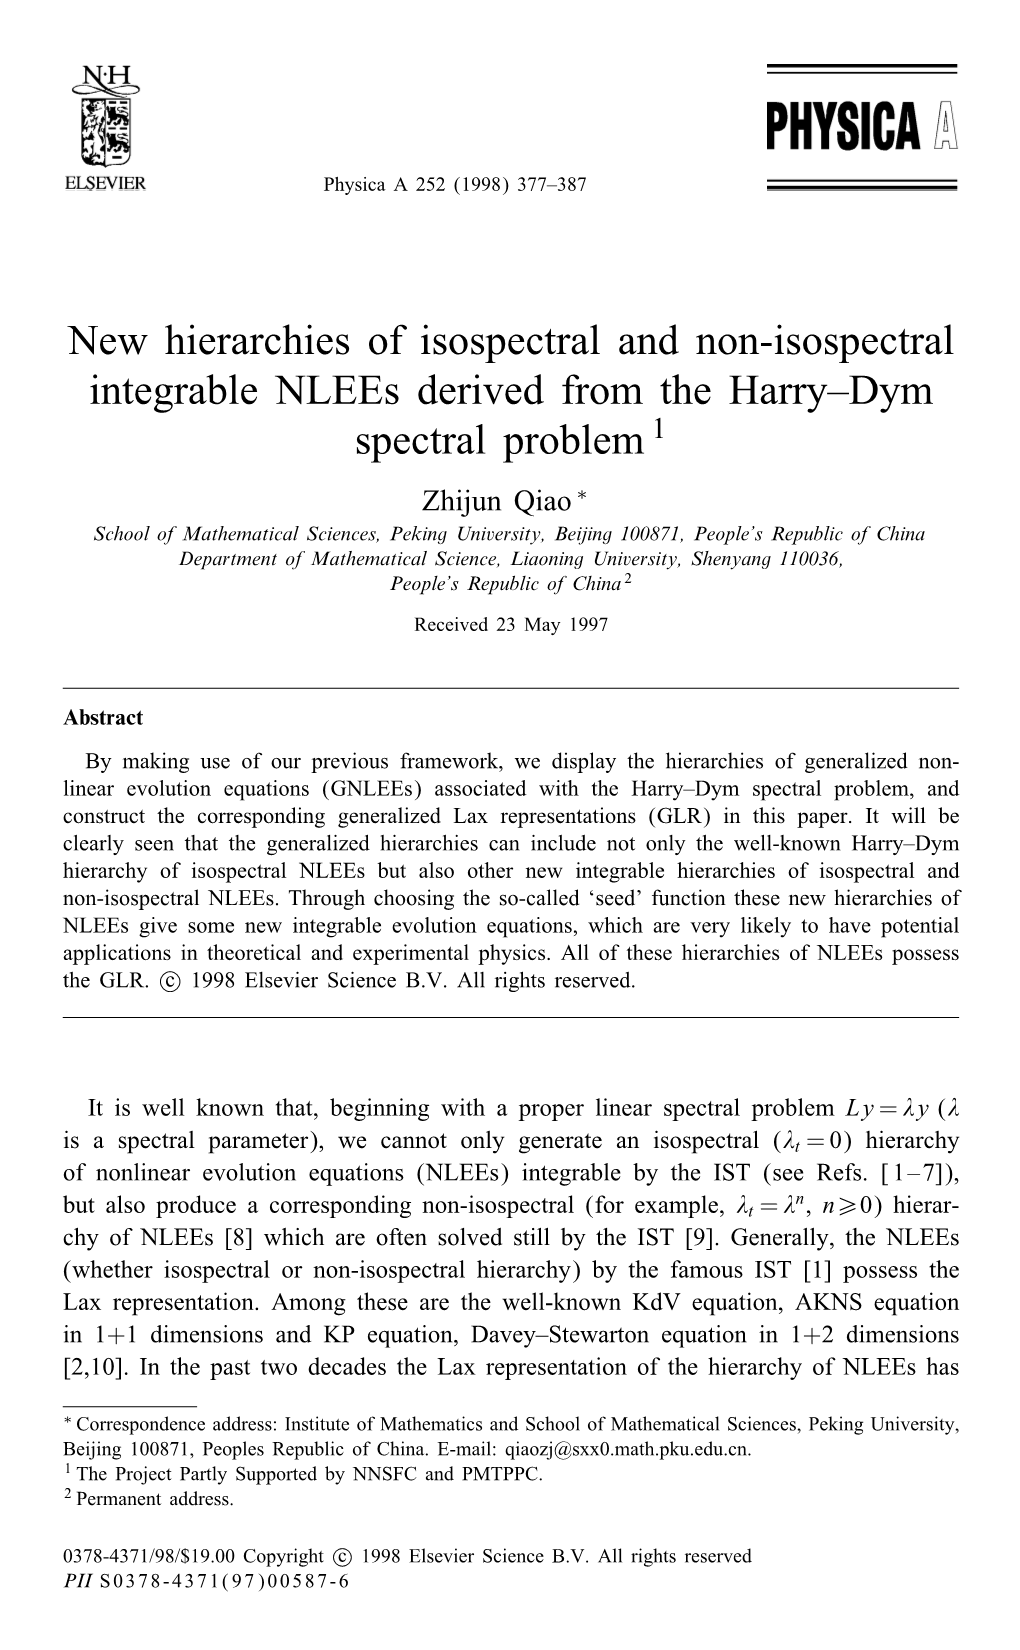 New Hierarchies of Isospectral and Non-Isospectral Integrable Nlees